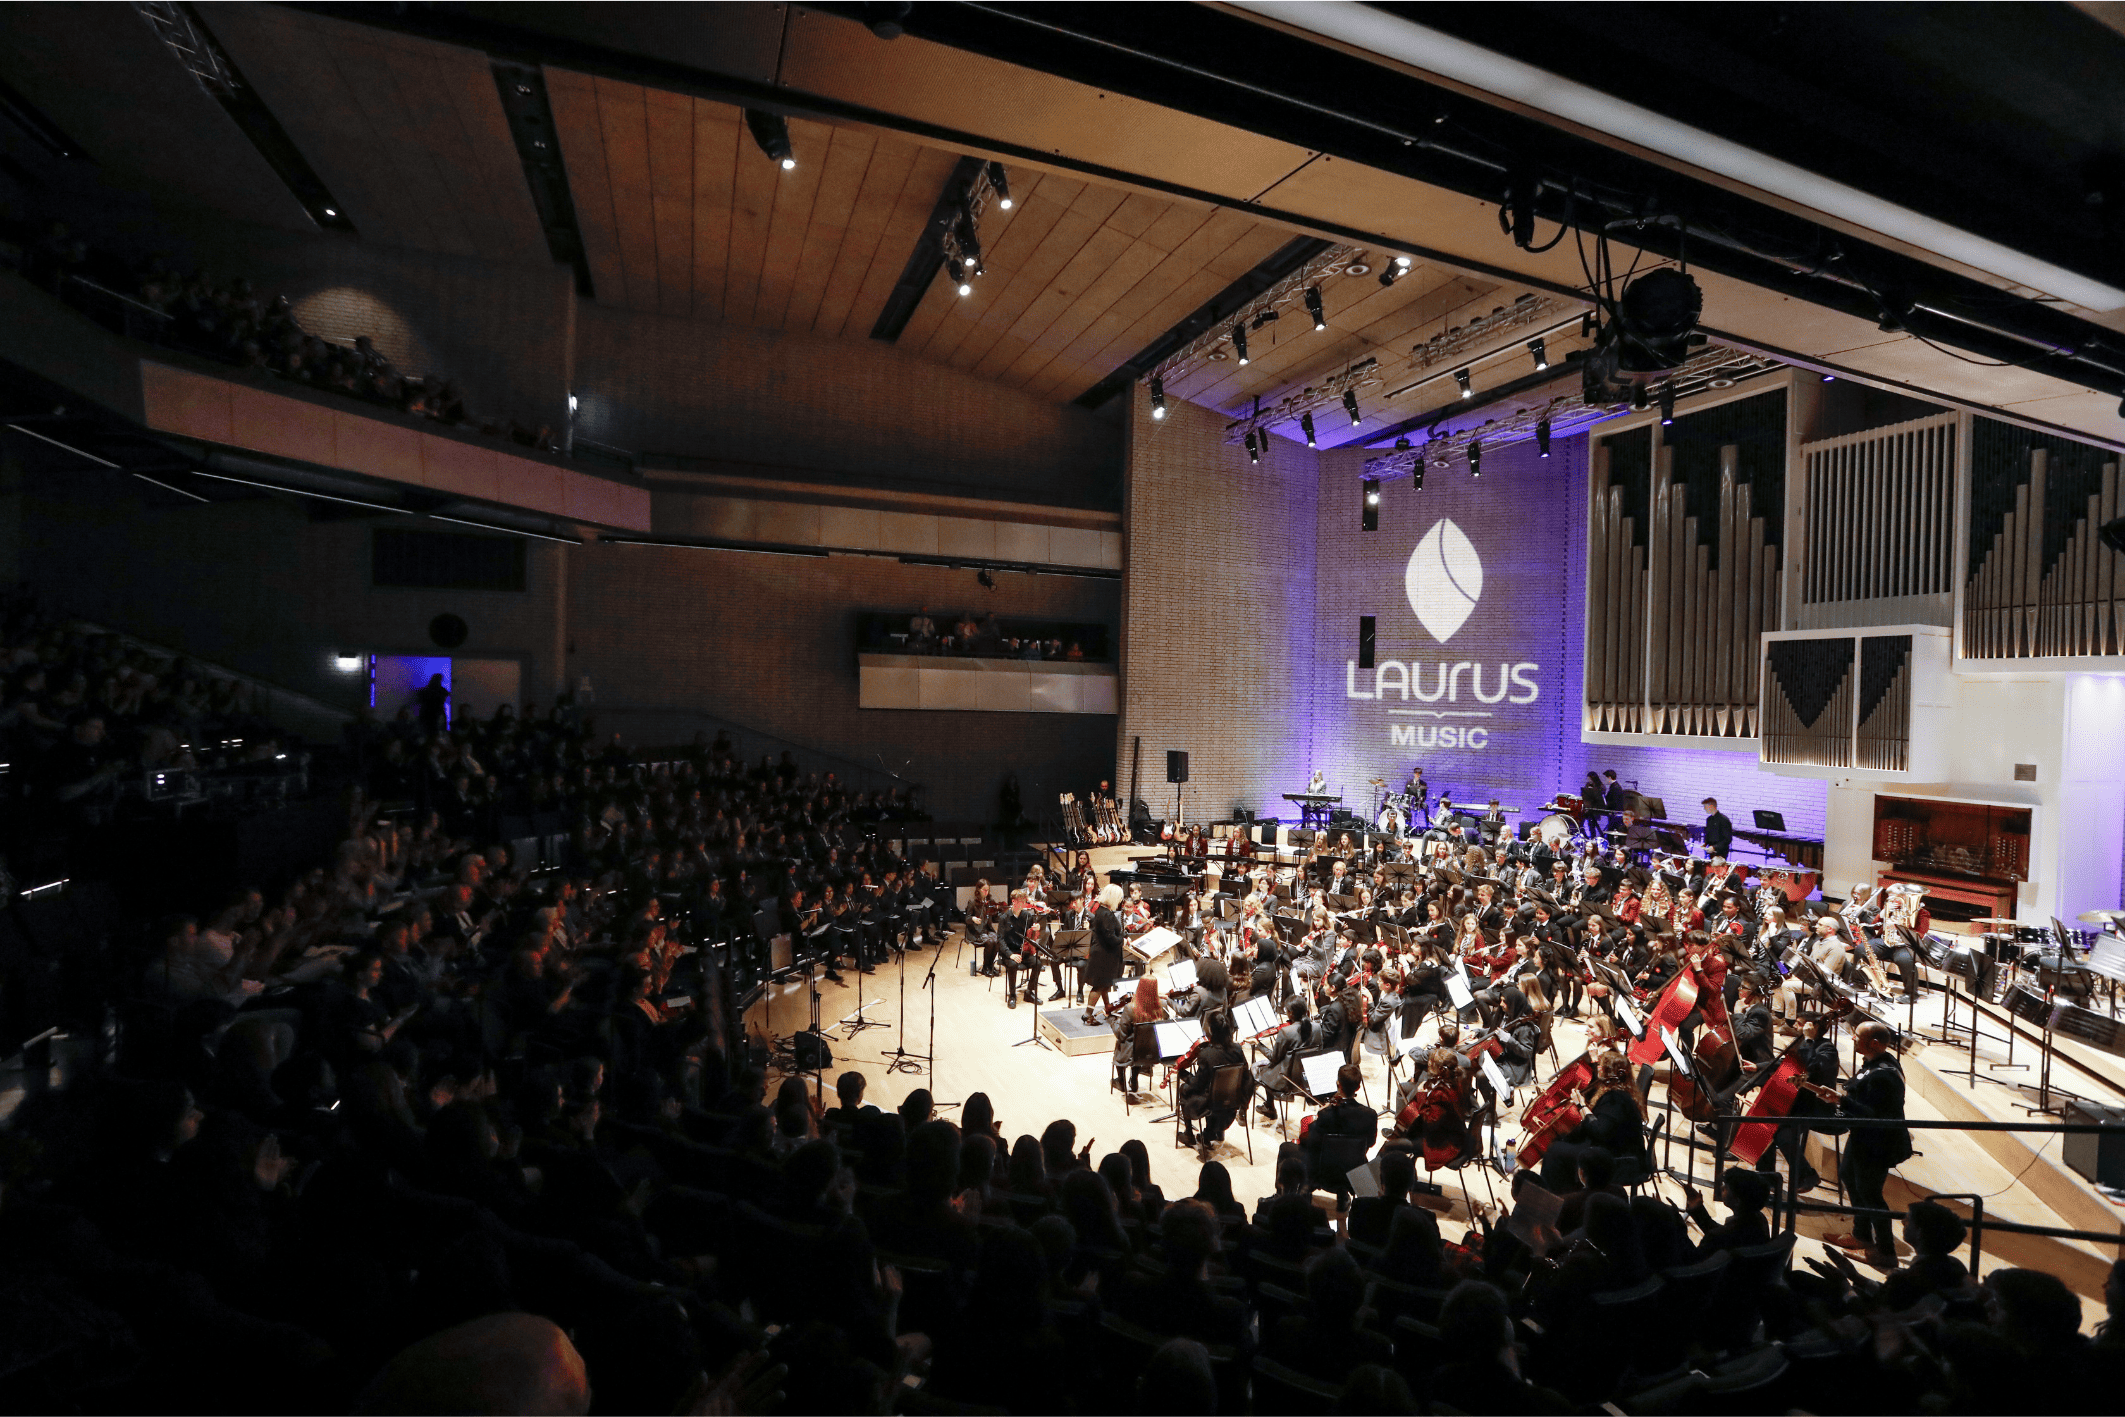 The RNCM Concert Hall full of onlookers as Laurus Cheadle Hulme students joined others from the Laurus Trust in Laurus Live